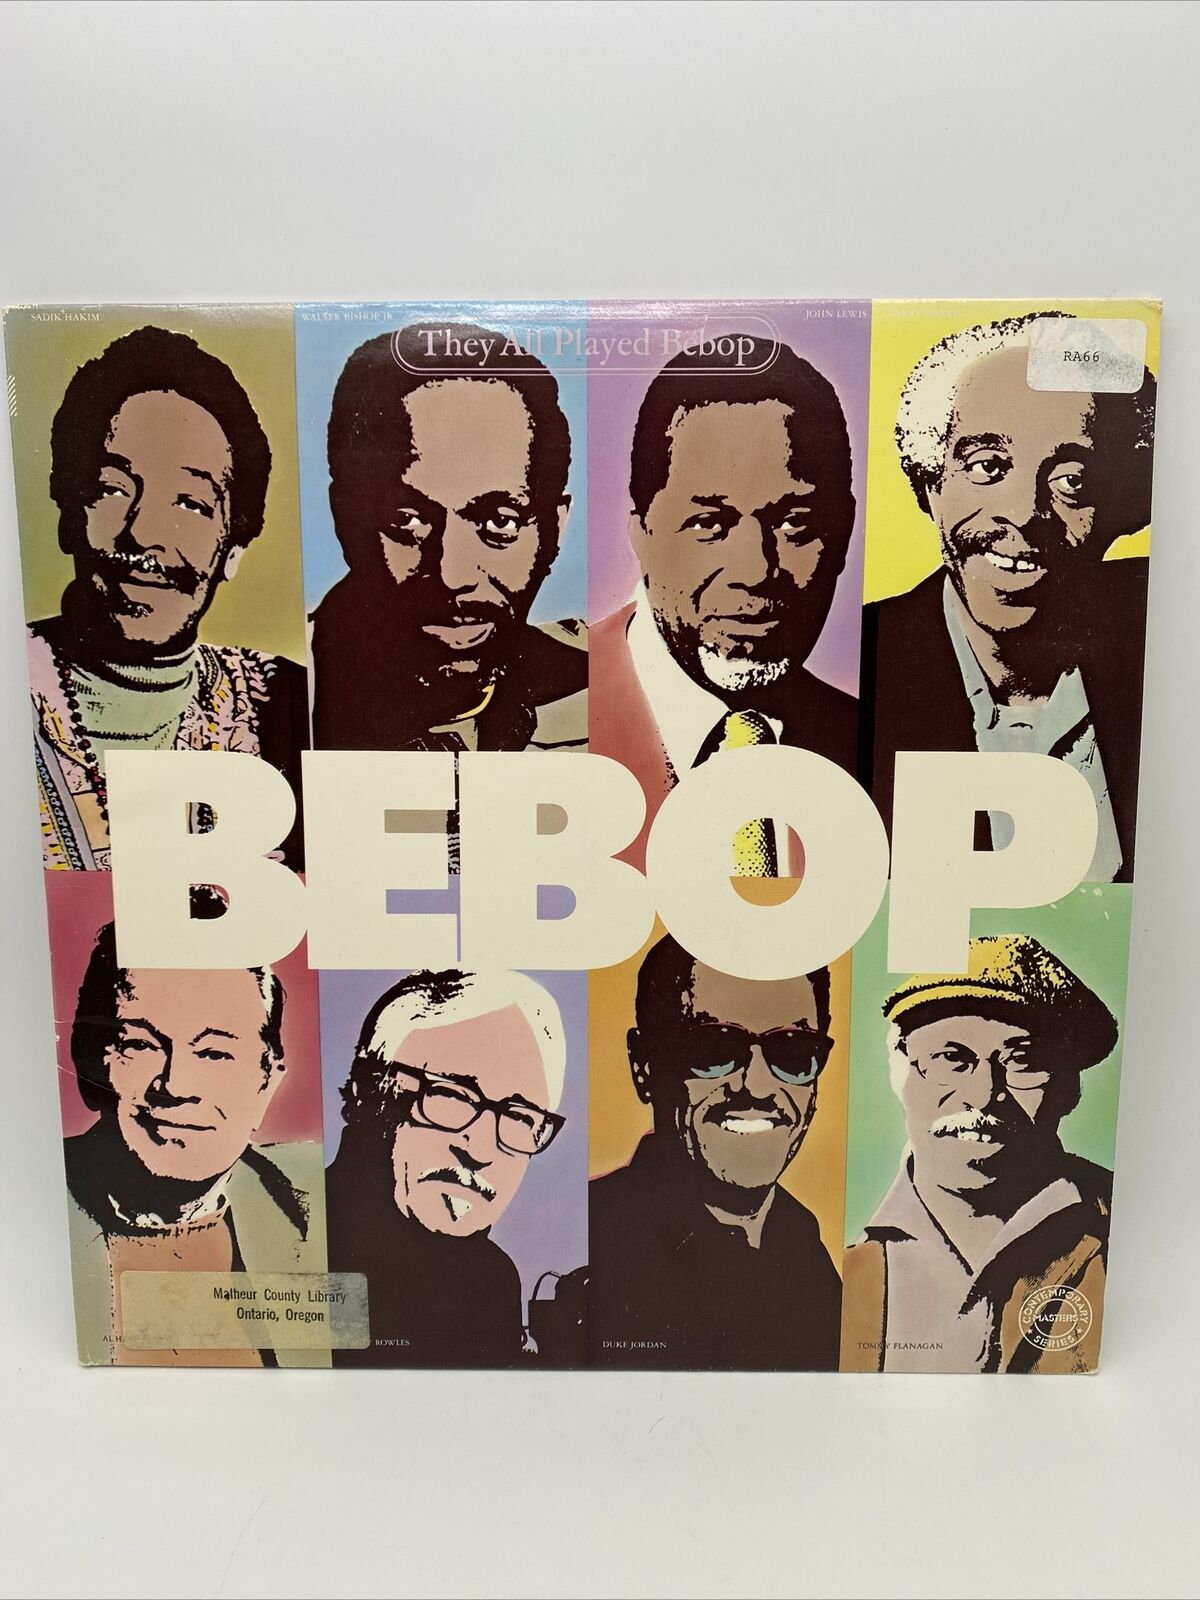 BEBOP They all Played Bebop Gatefold 1982 Double Vinyl LP Columbia Records